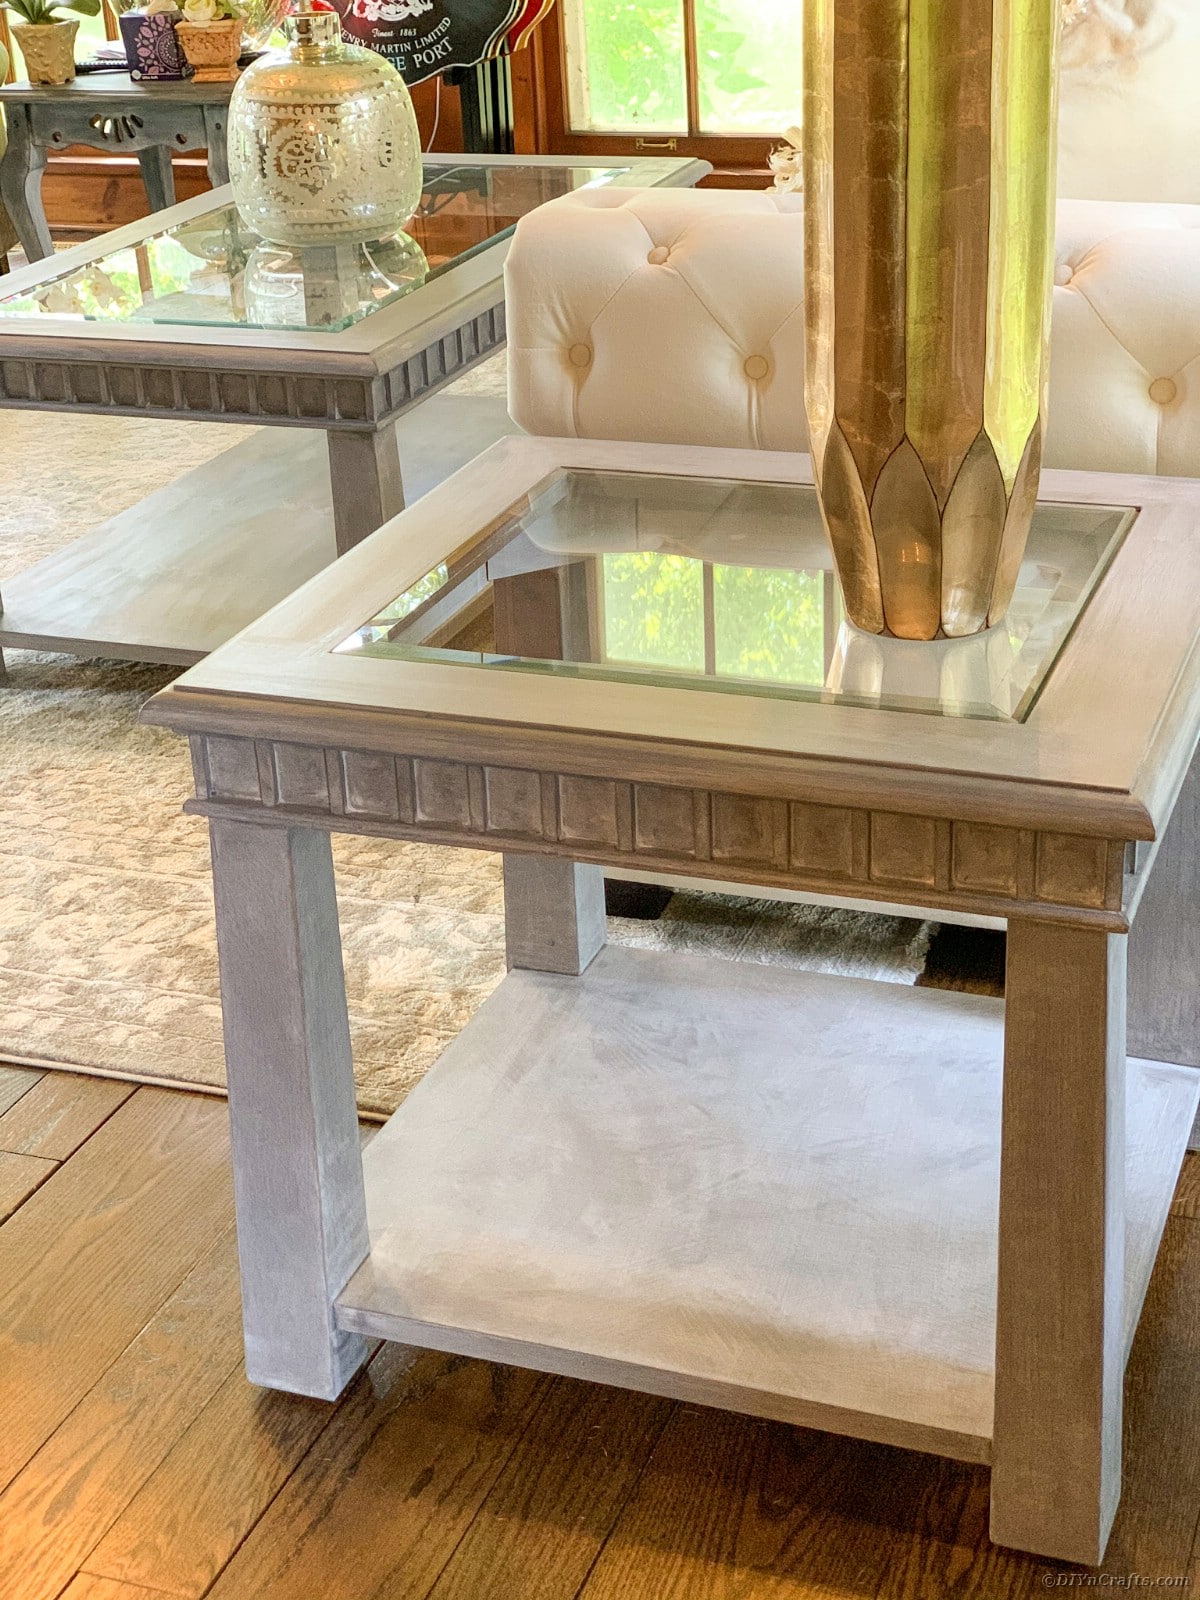 Finished glass top table restoration